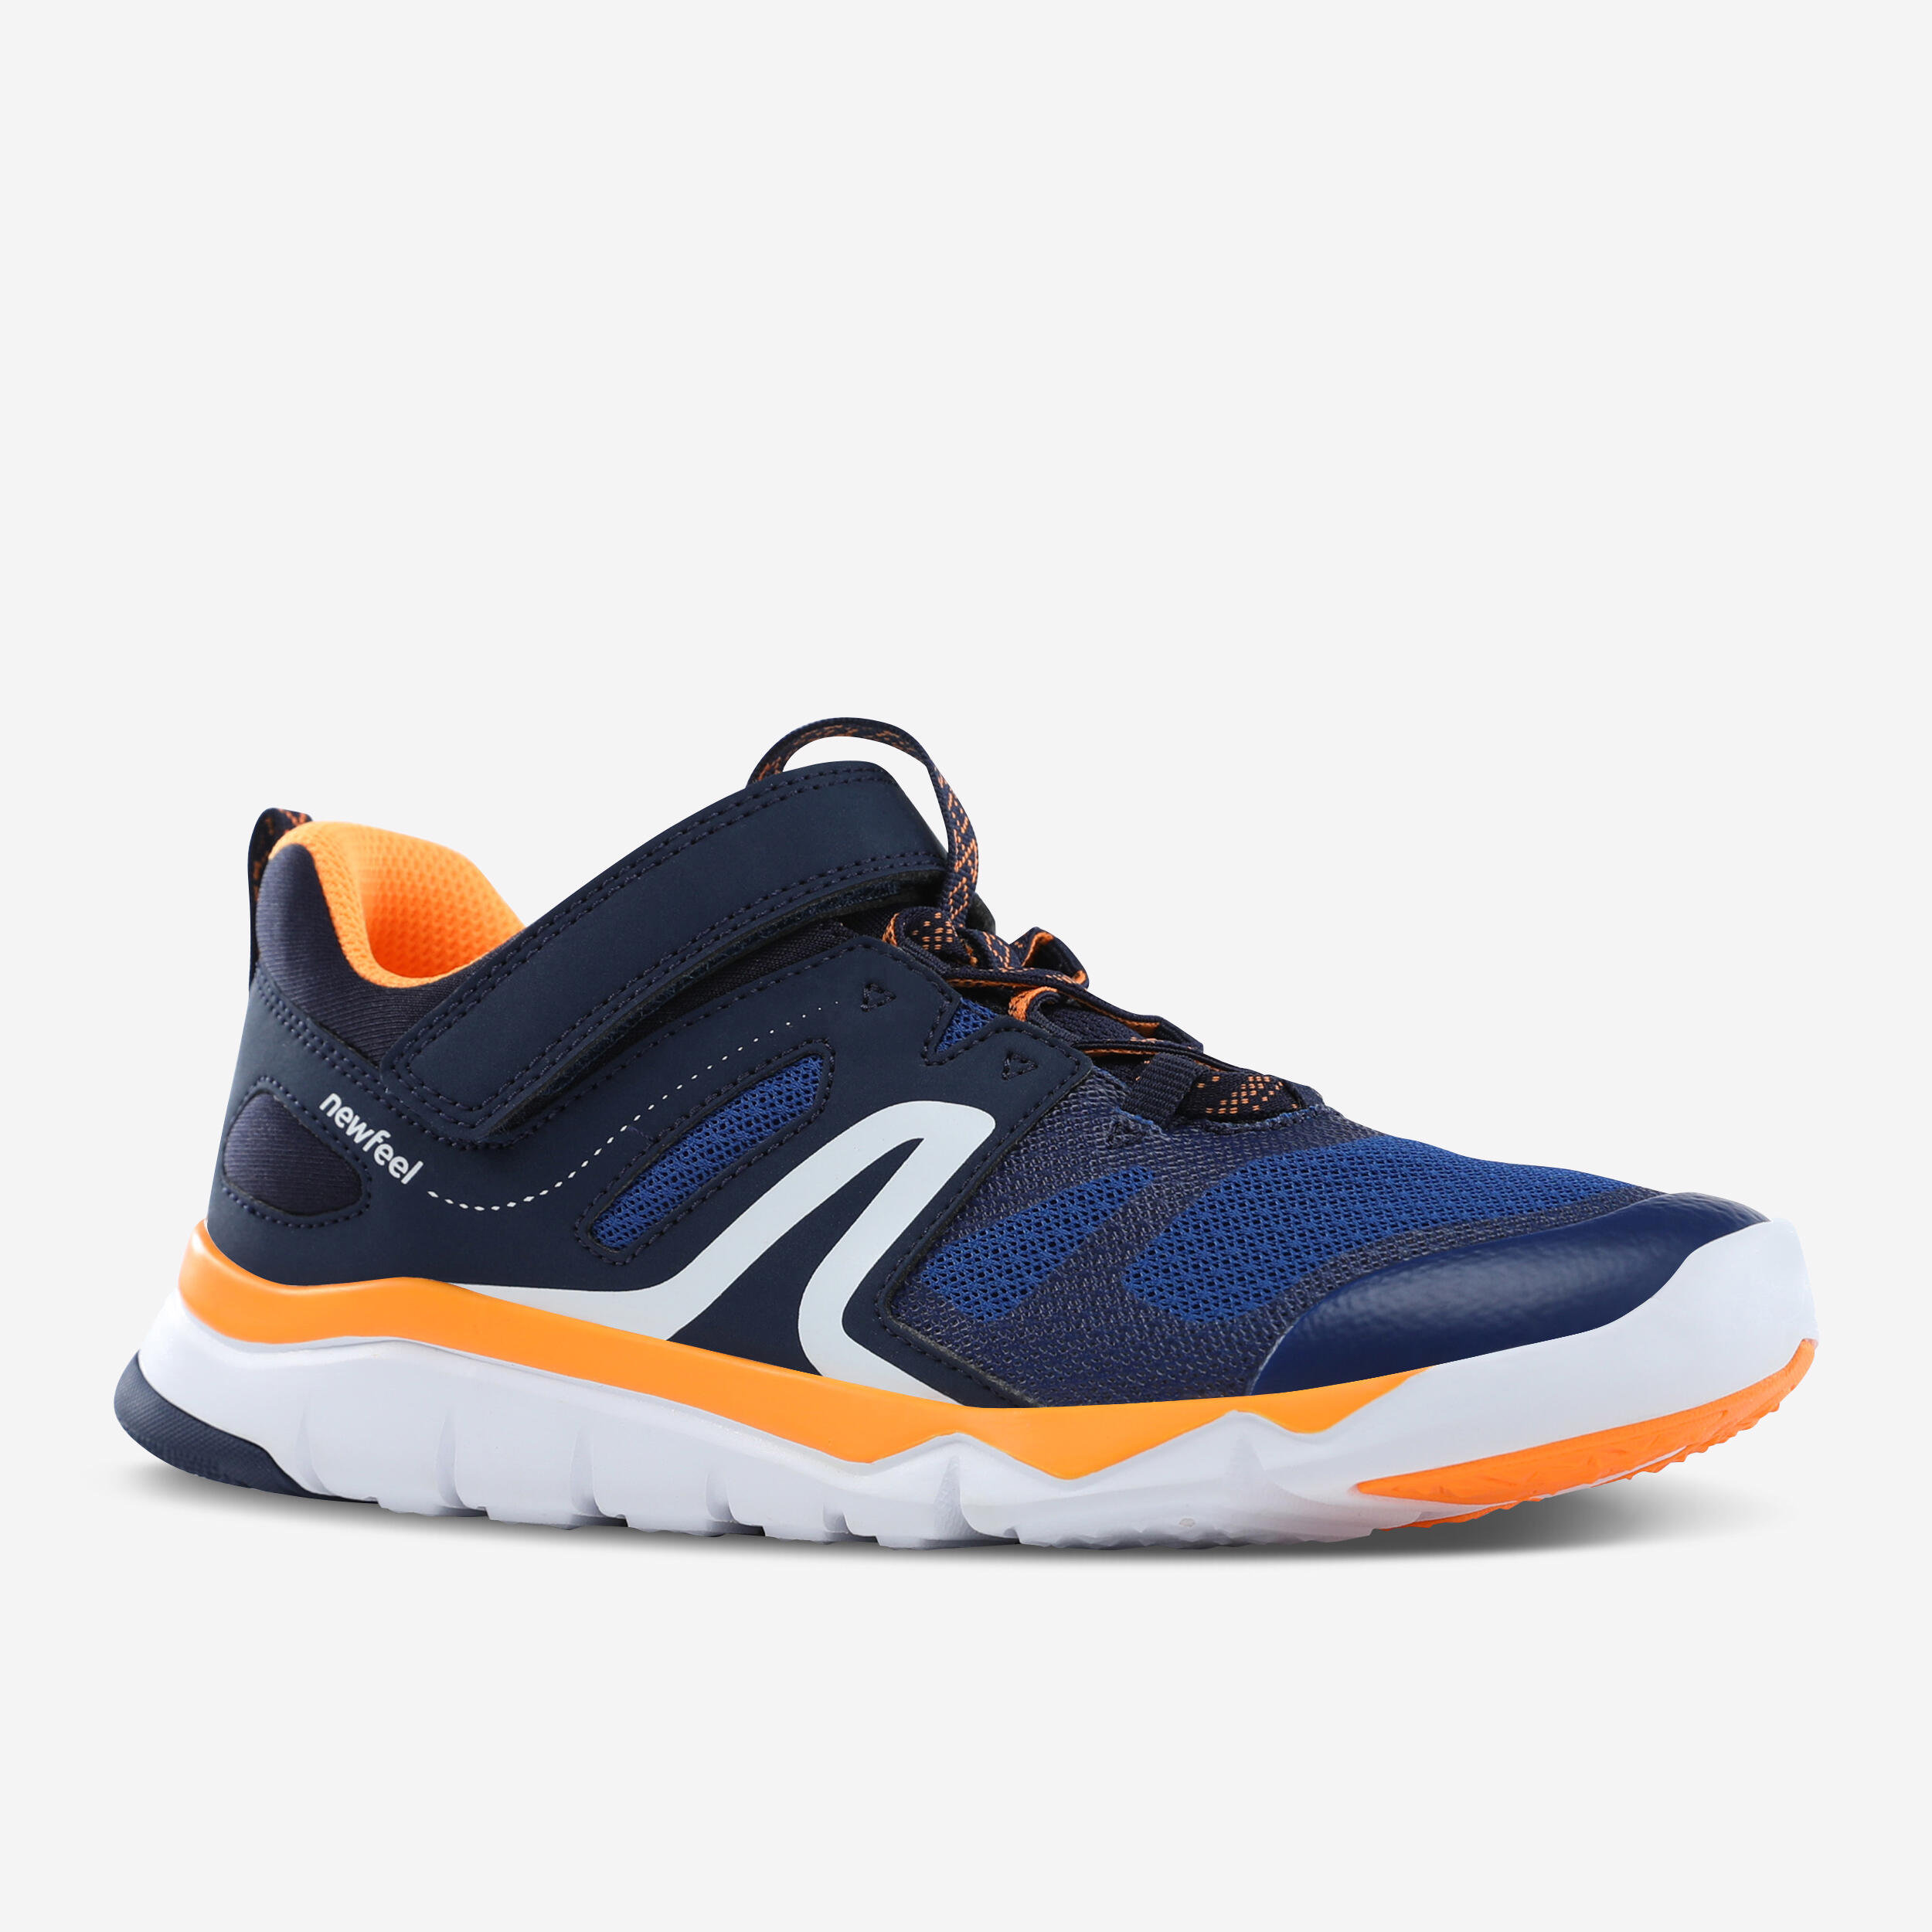 DECATHLON Kids' lightweight and breathable rip-tab trainers, blue/orange